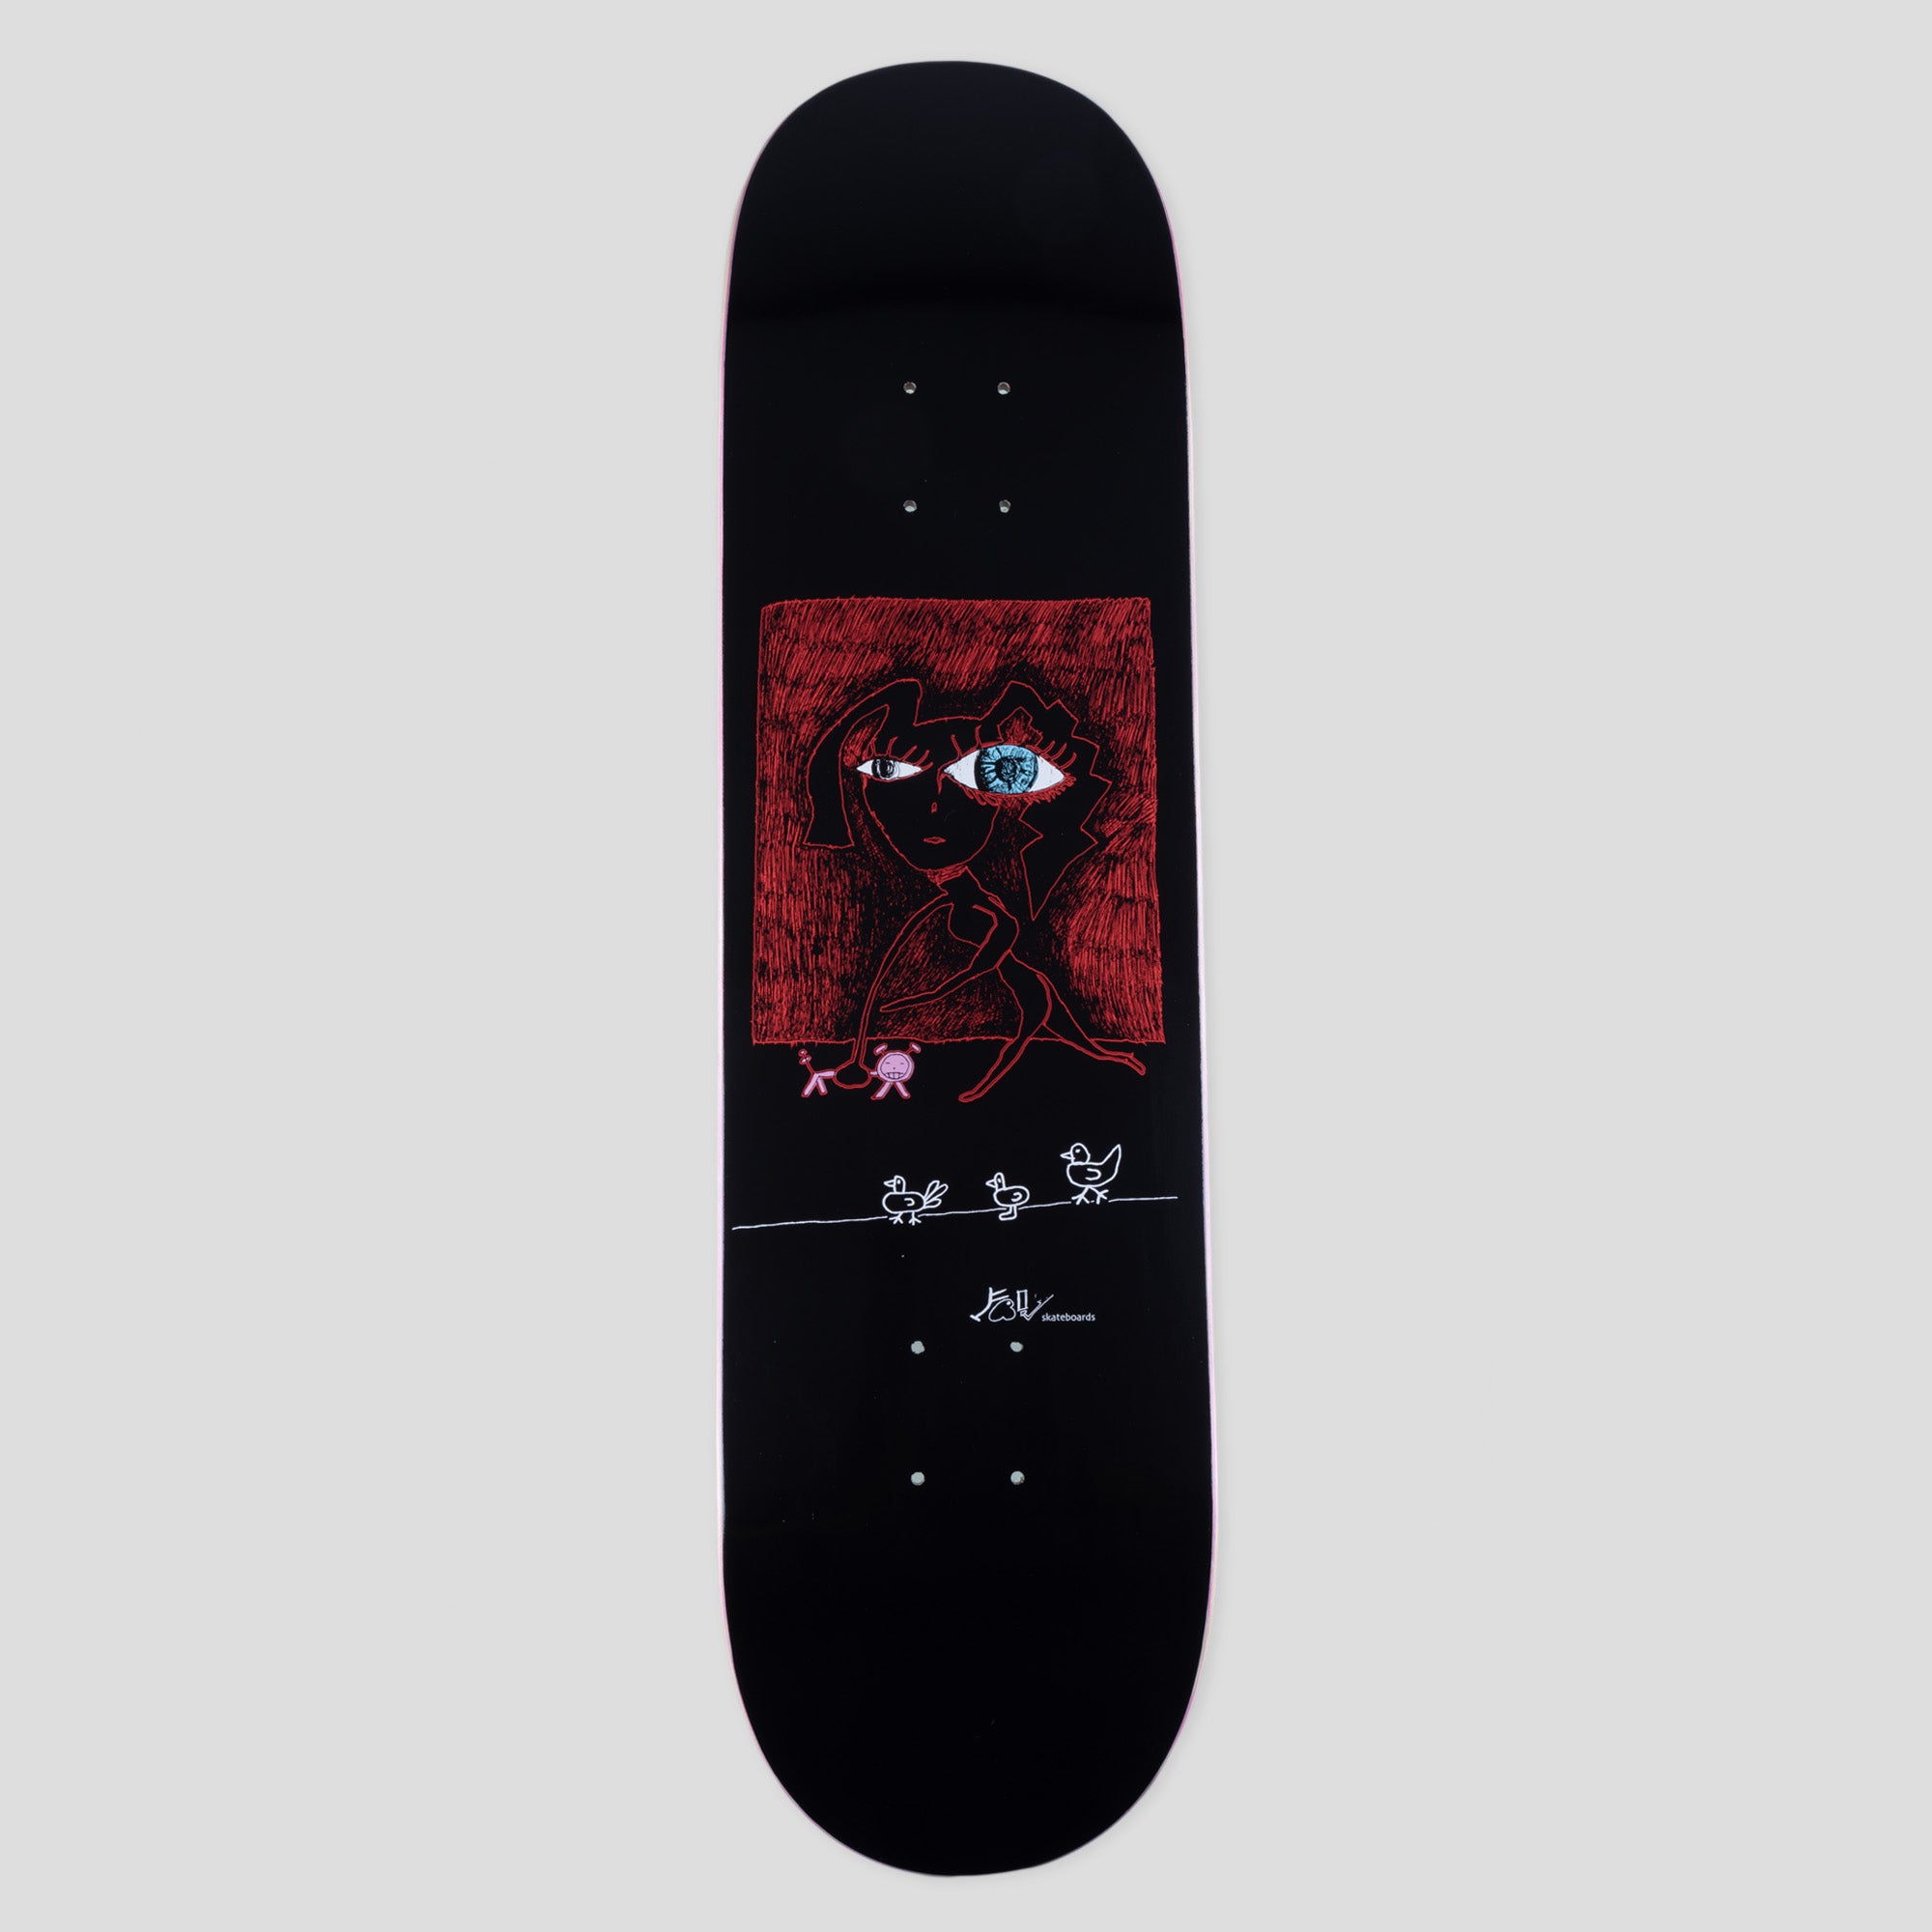 FROG "CHICKENS" DECK 8.25"